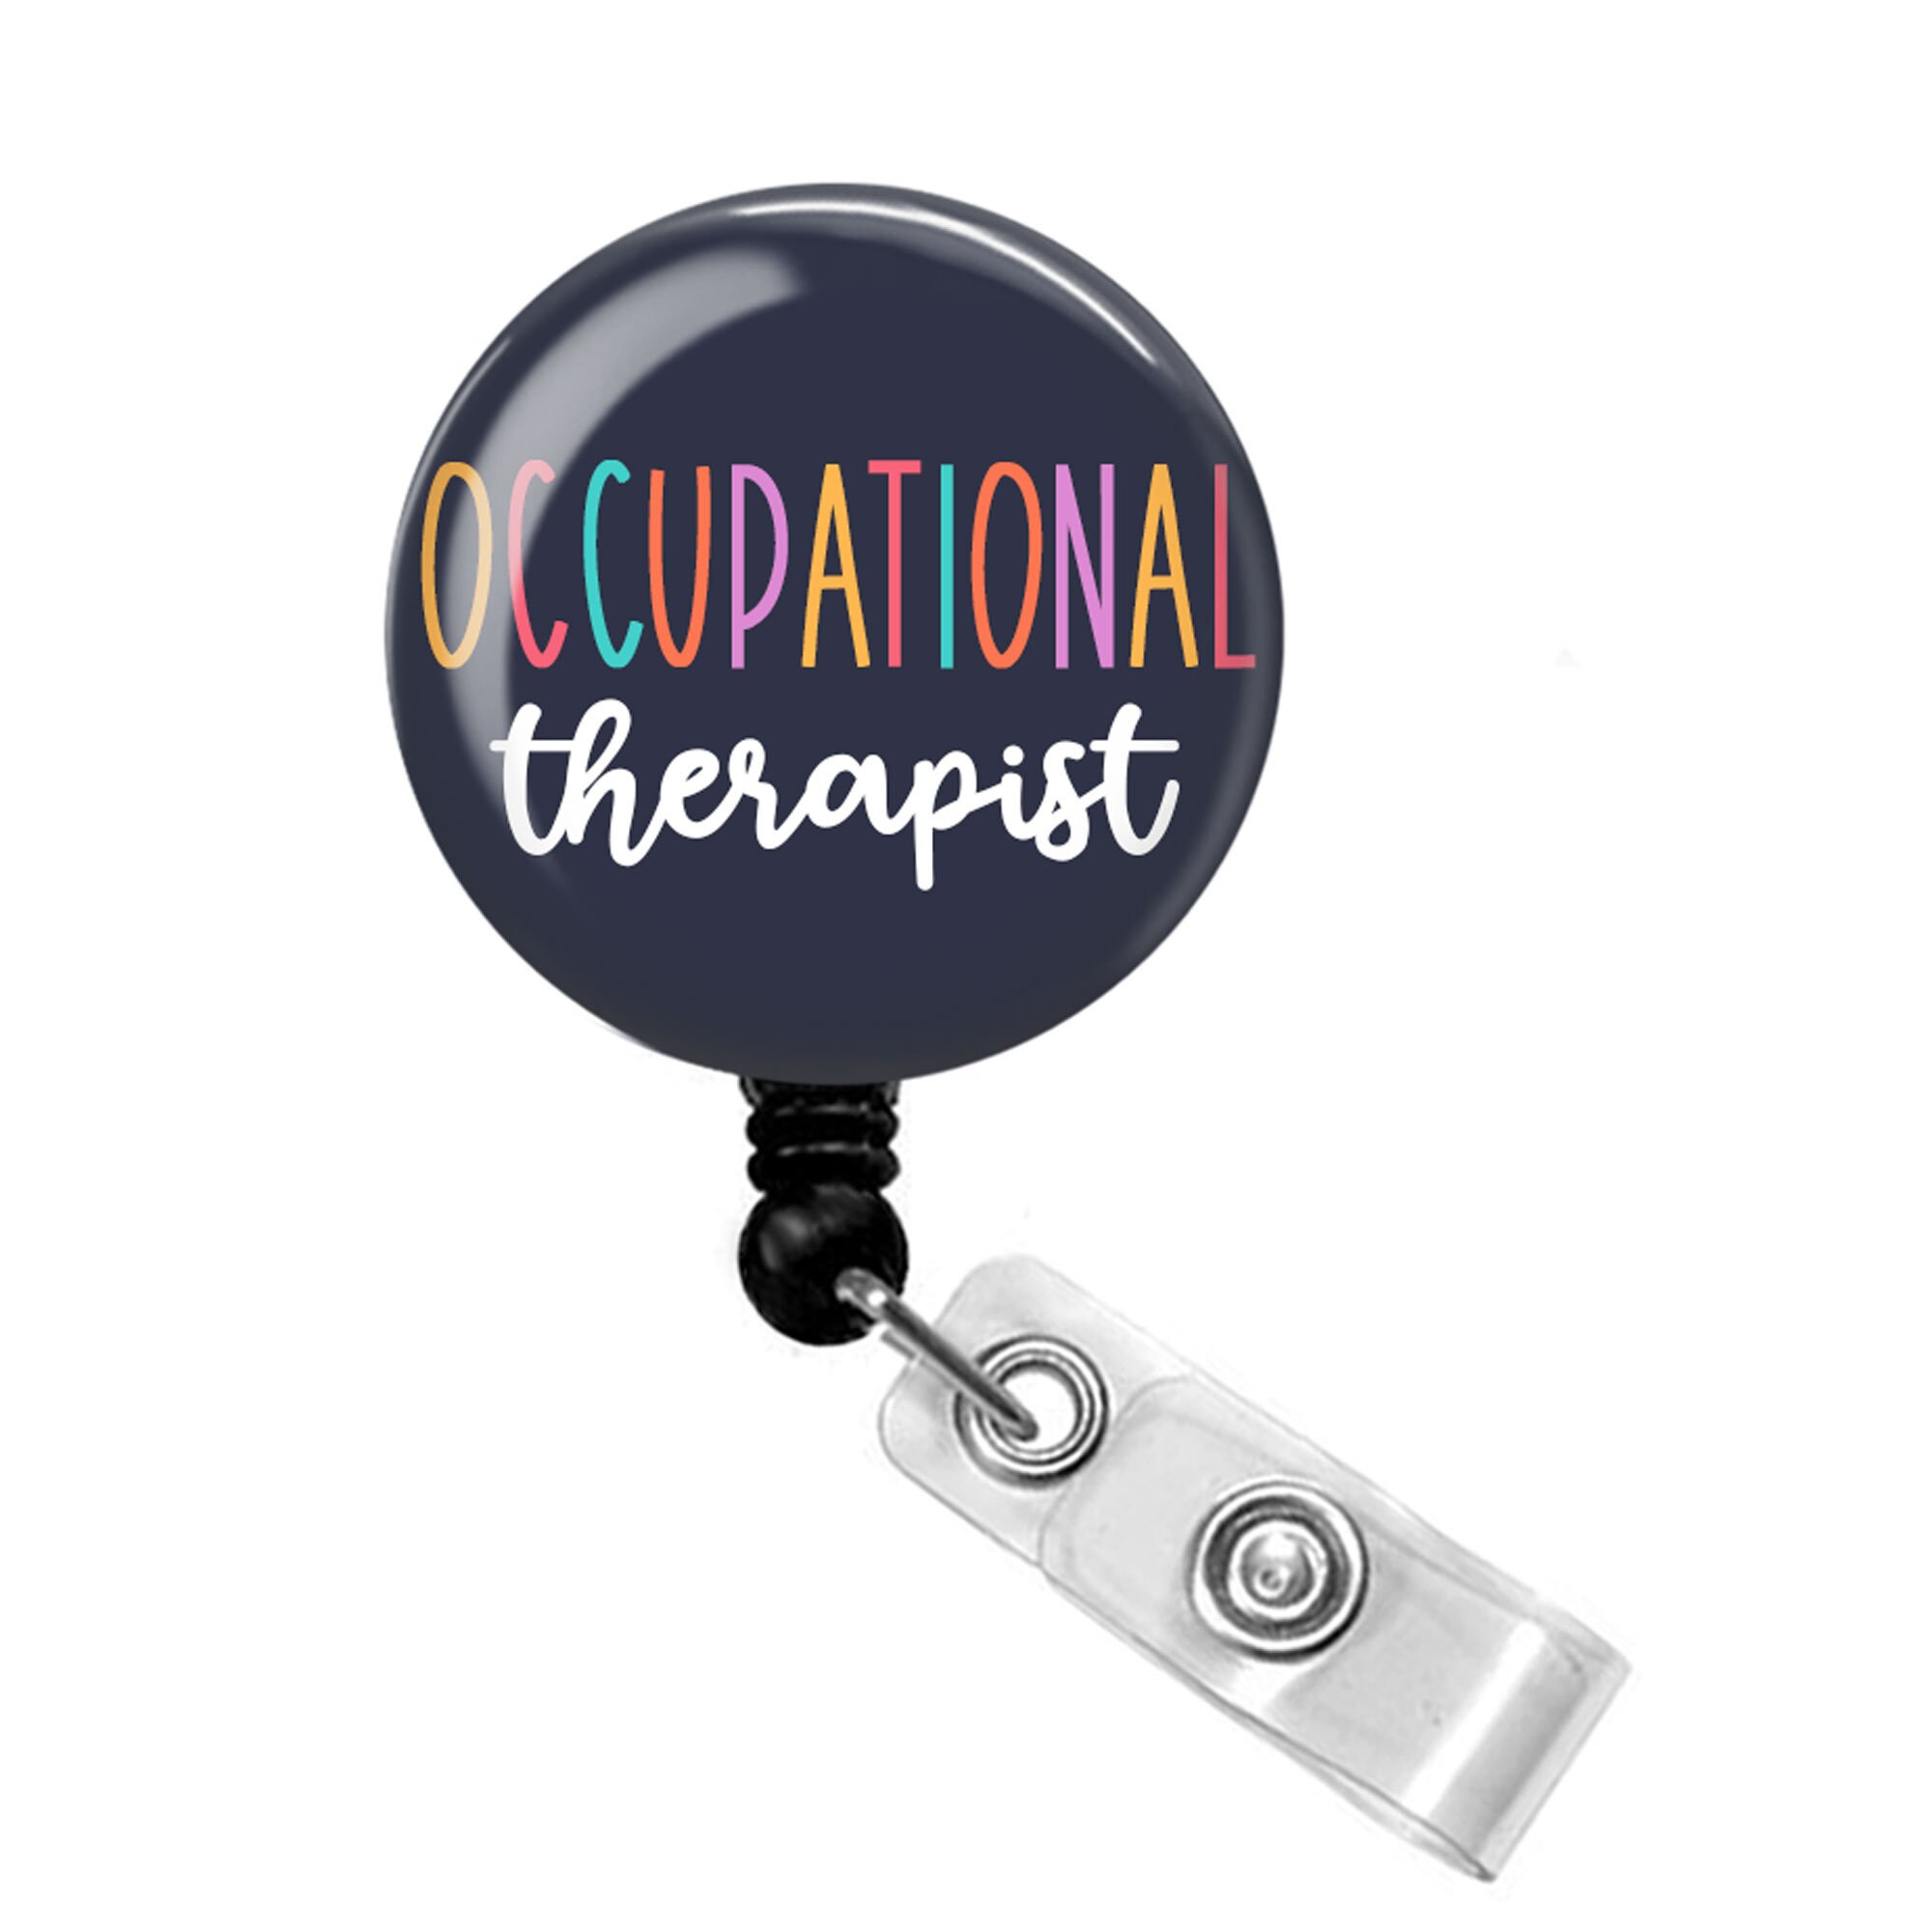 Occupational Therapist Badge Reelot Badge Reeloccupational 